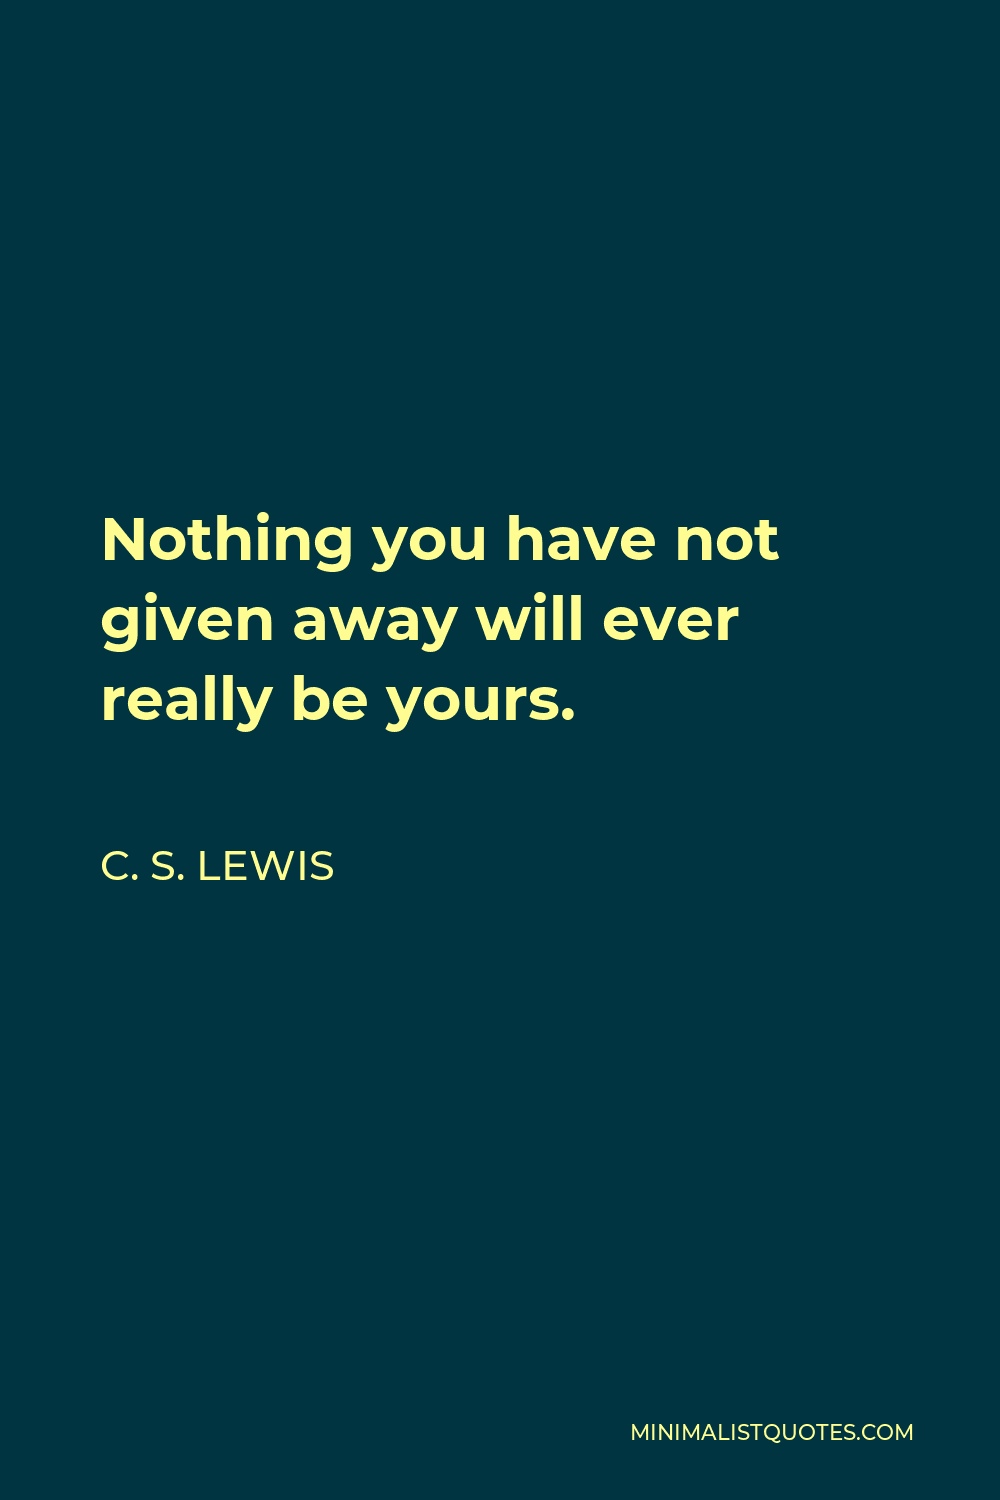 C. S. Lewis Quote - Nothing you have not given away will ever really be yours.